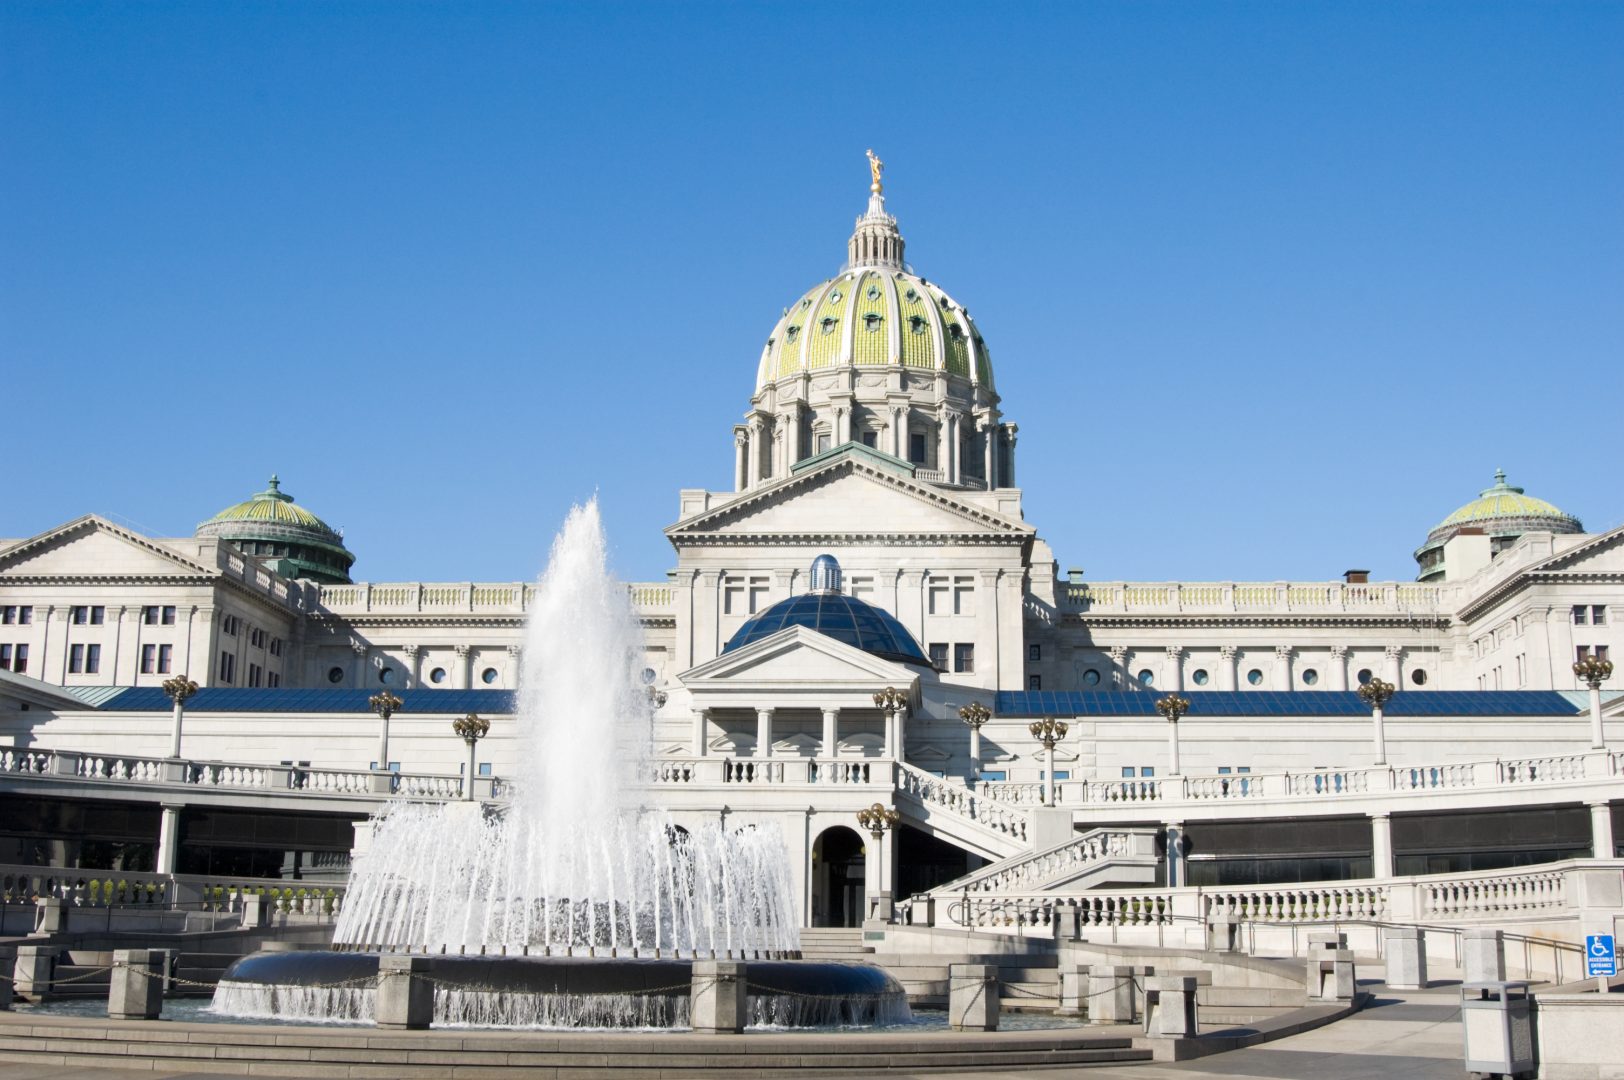 Pennsylvania state capitol government building in Harrisburg, rear view with water fountain and rotunda.